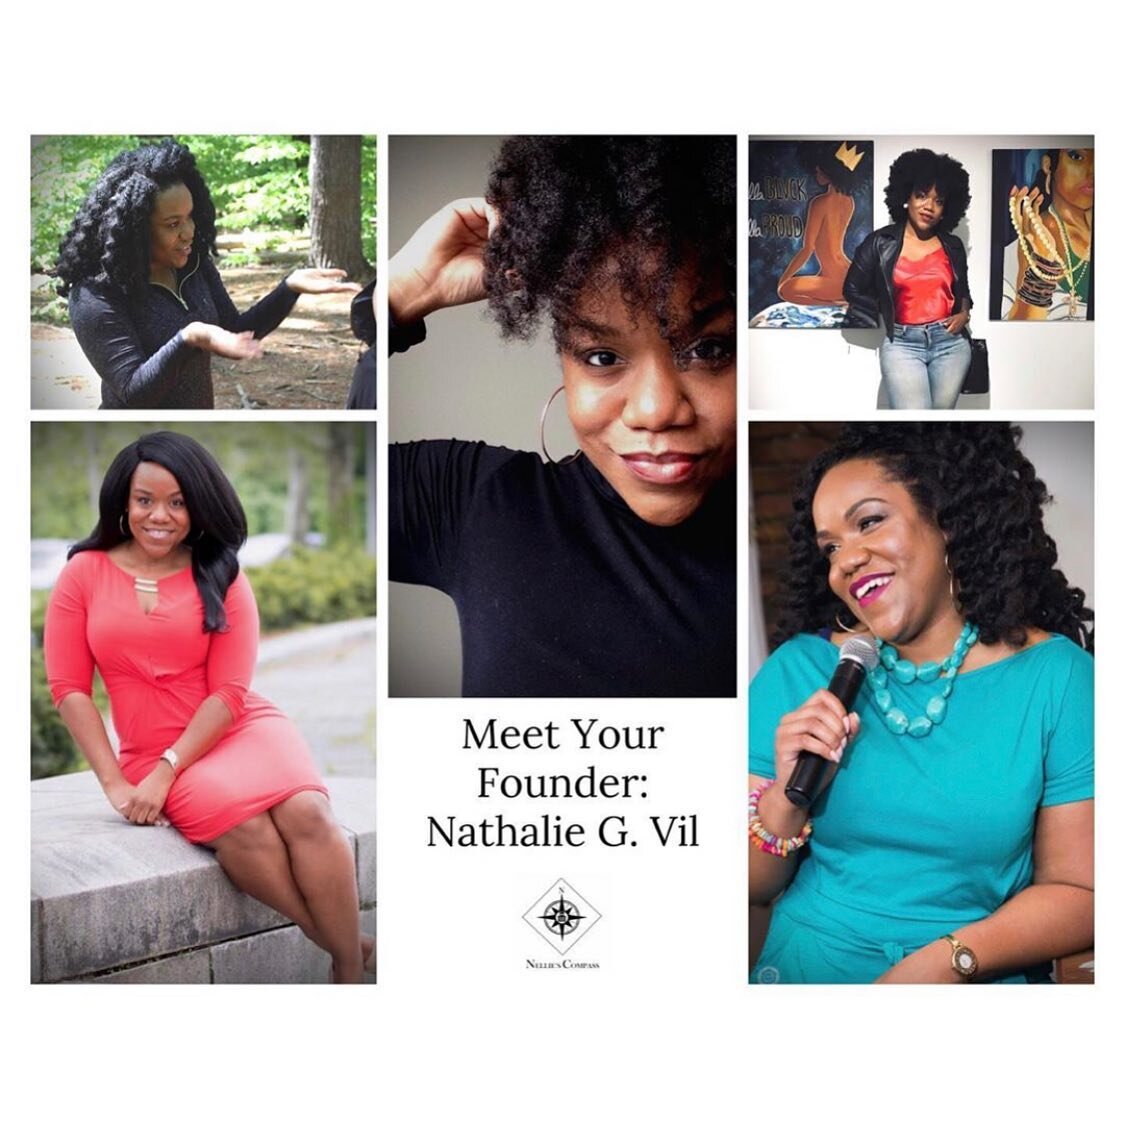 Nathalie G. Vil (33)
Founder (Nellie&rsquo;s Compass), Senior Director, Event Planner/Coordinator, Board Member, Community Organizer, Mental Health Advocate &amp; Artist
@thesocialloner Here&rsquo;s what Nathalie had to say: Navigating my way through